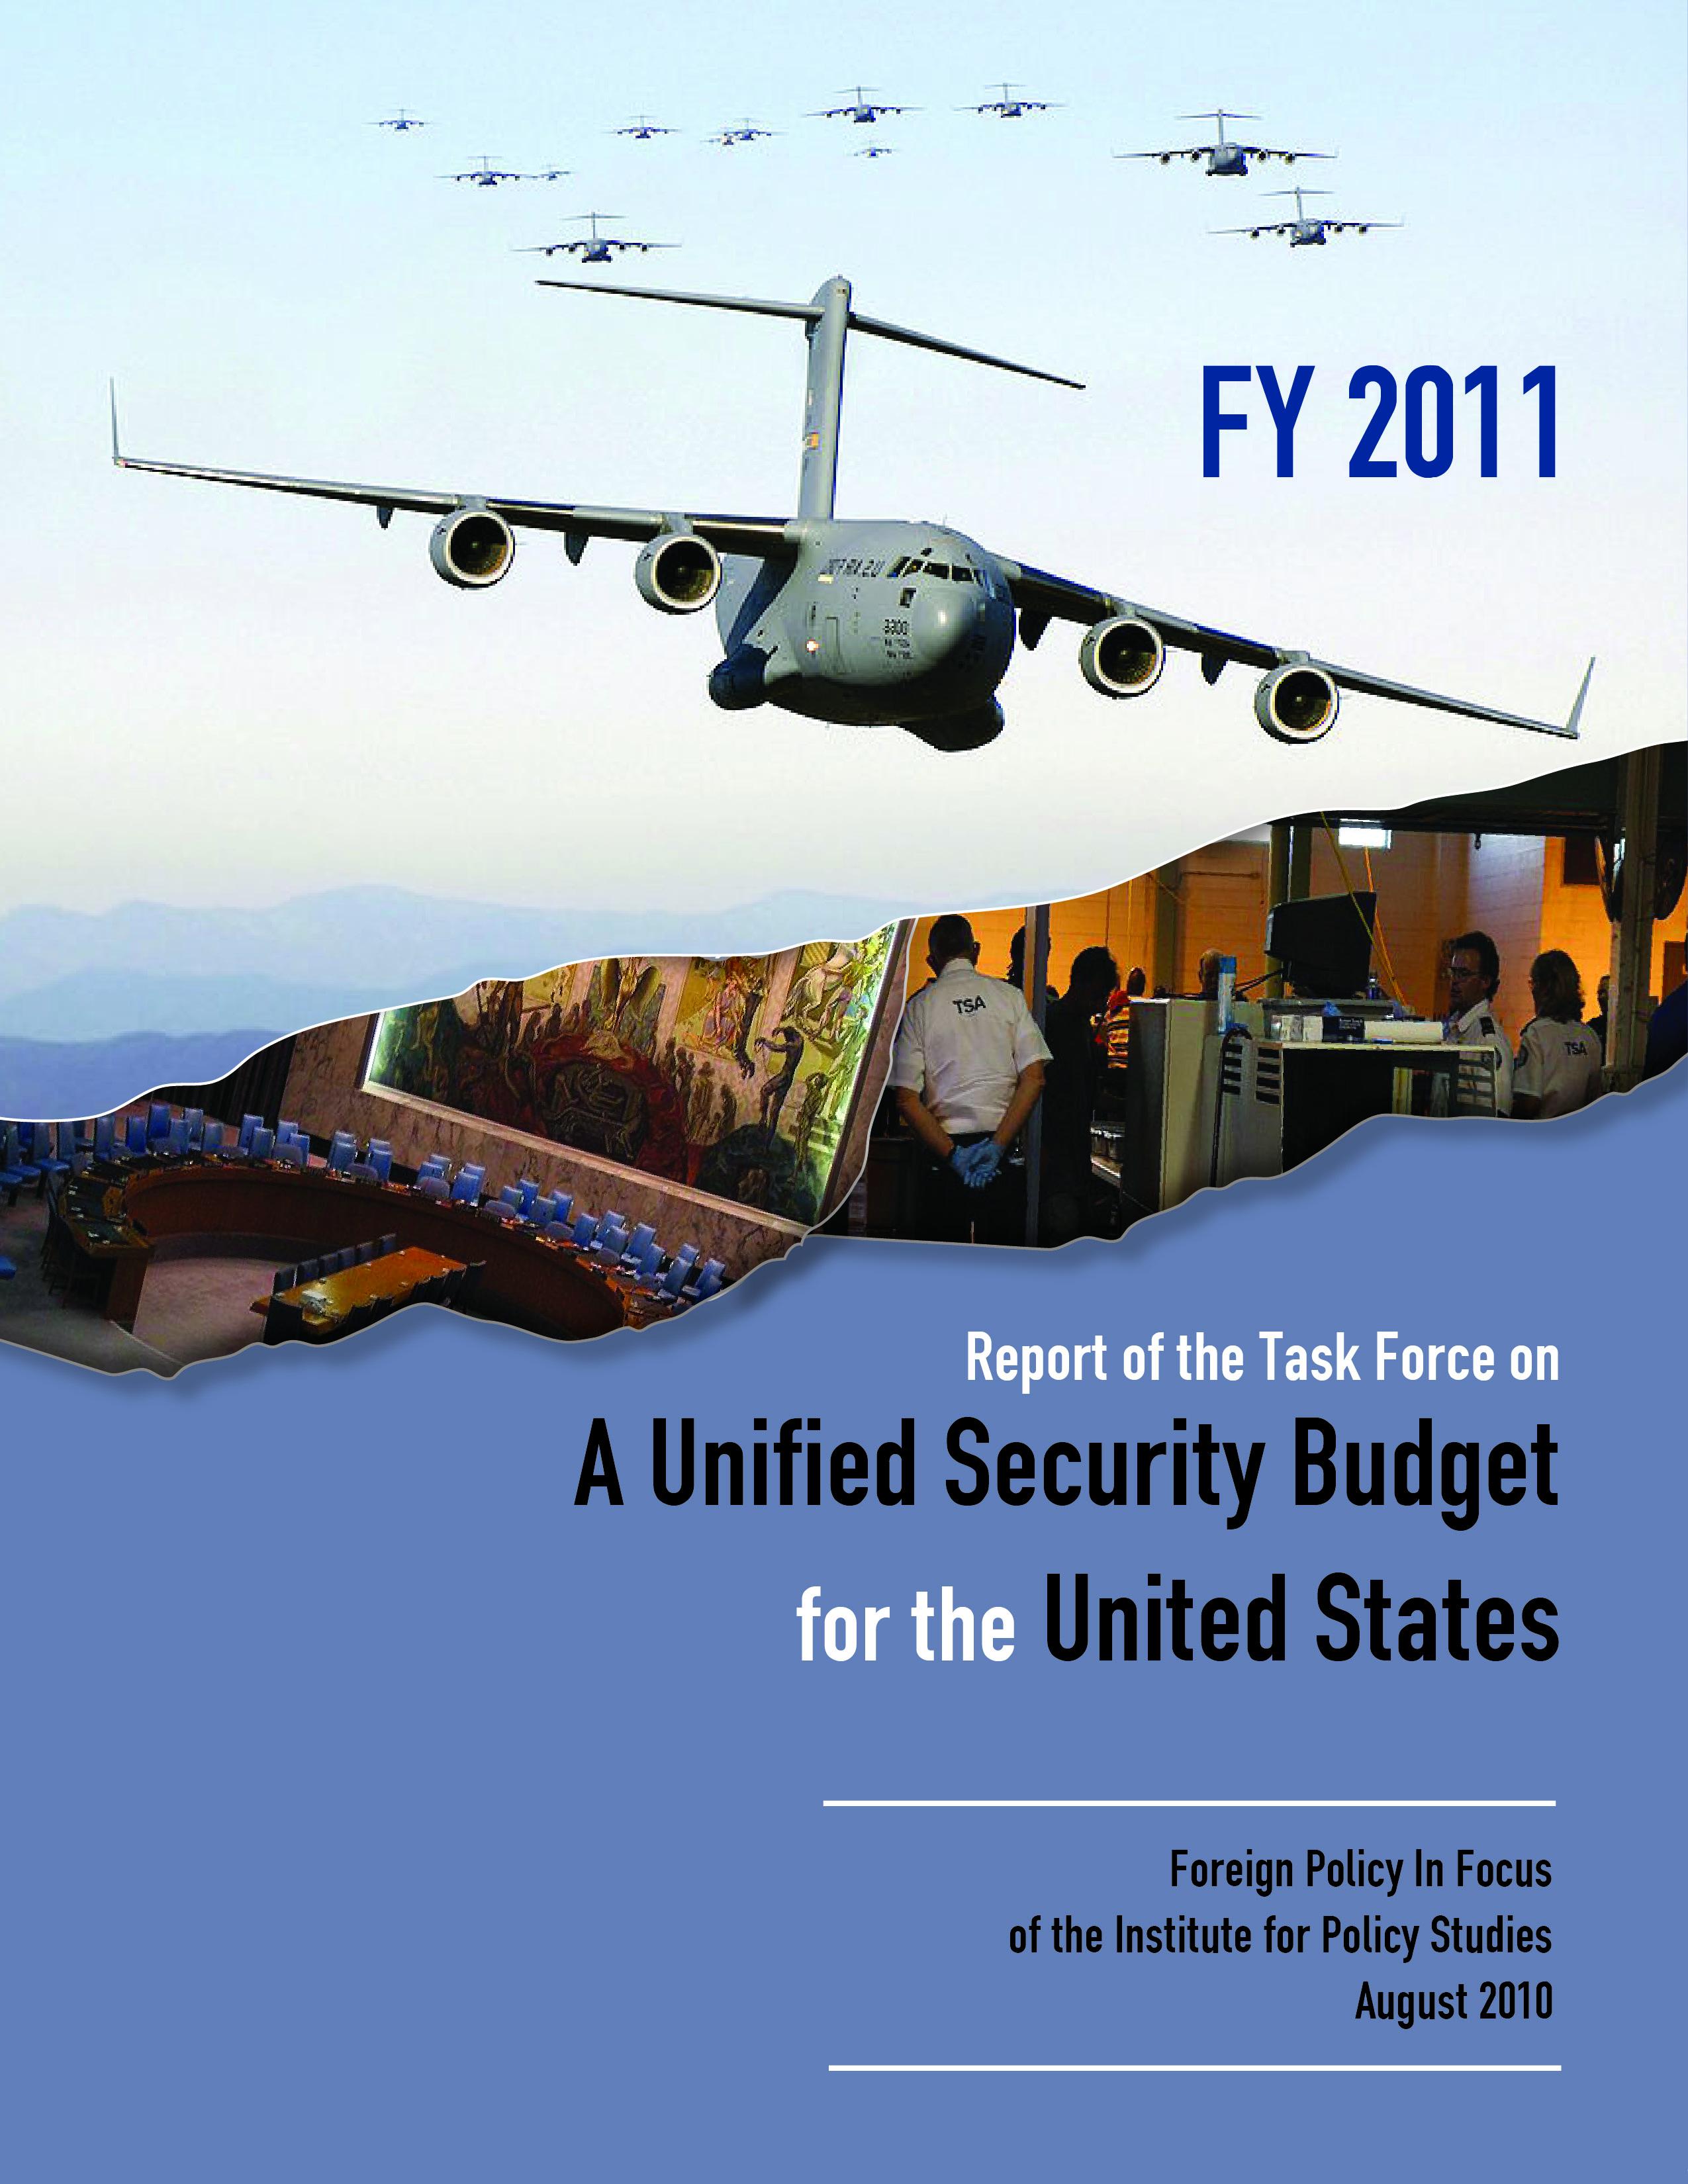 A Unified Security Budget for the United States, FY 2011